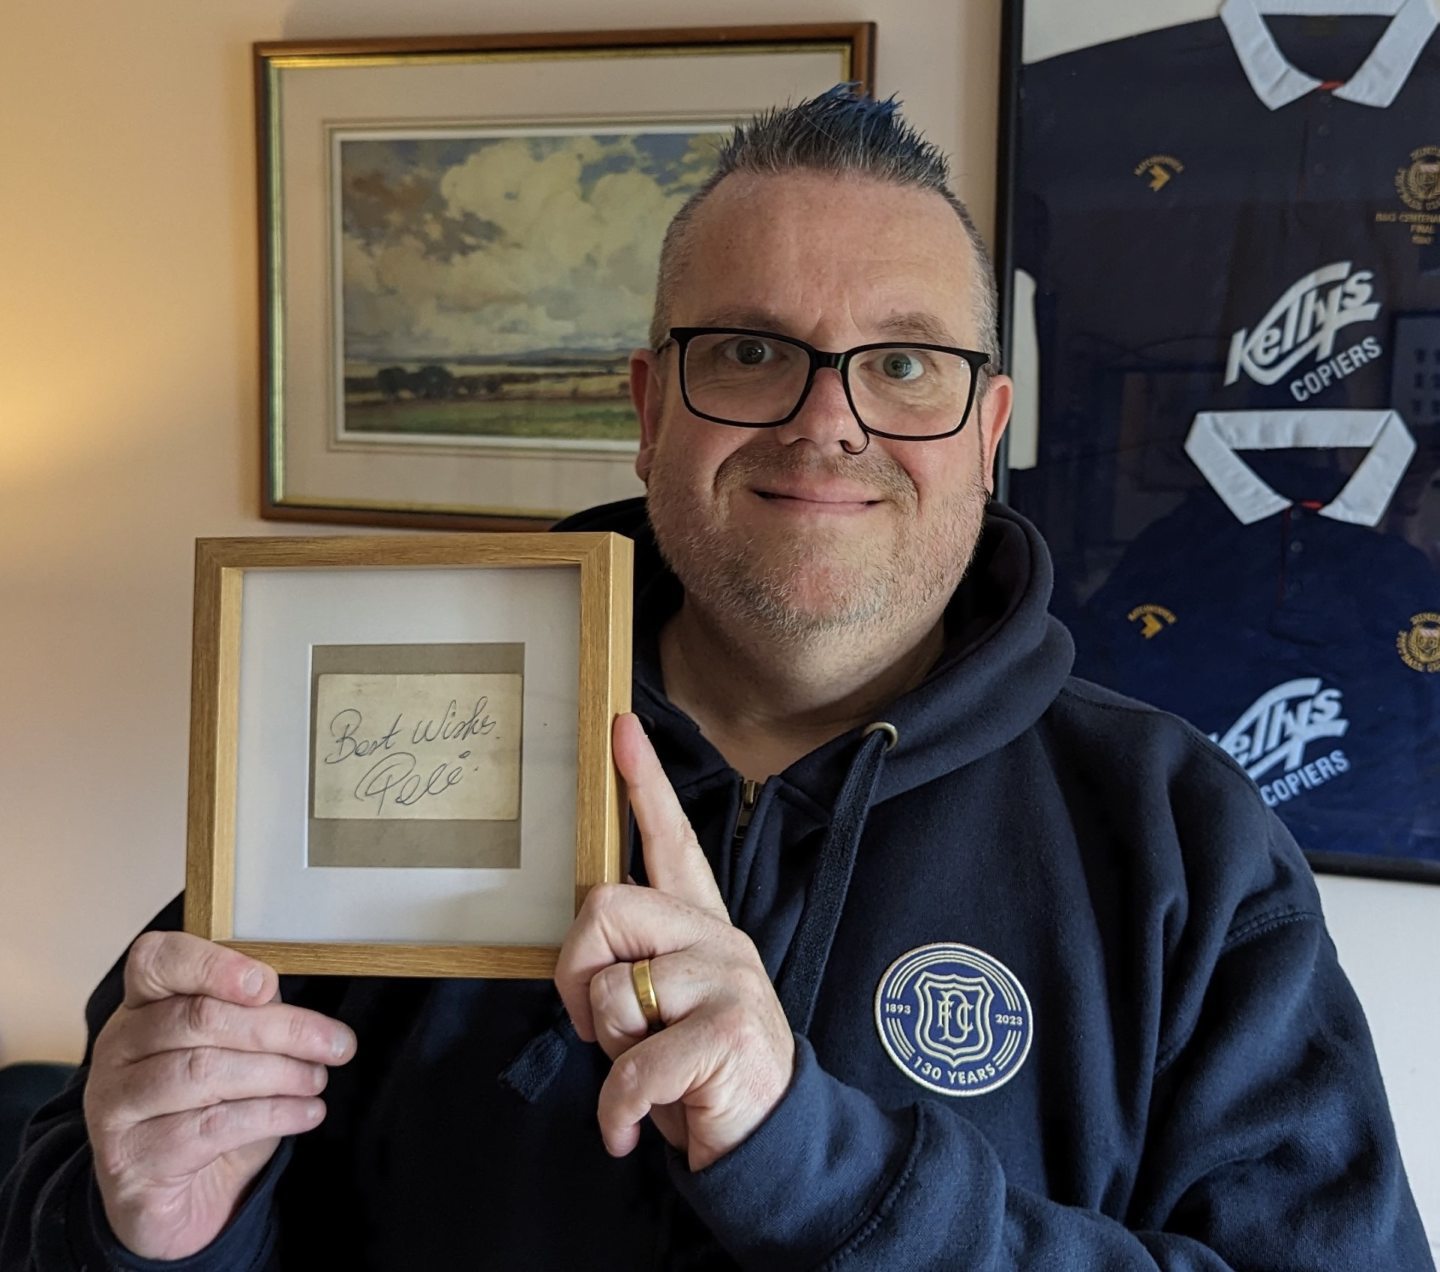 Jim Gellatly with signed business card from Pelé